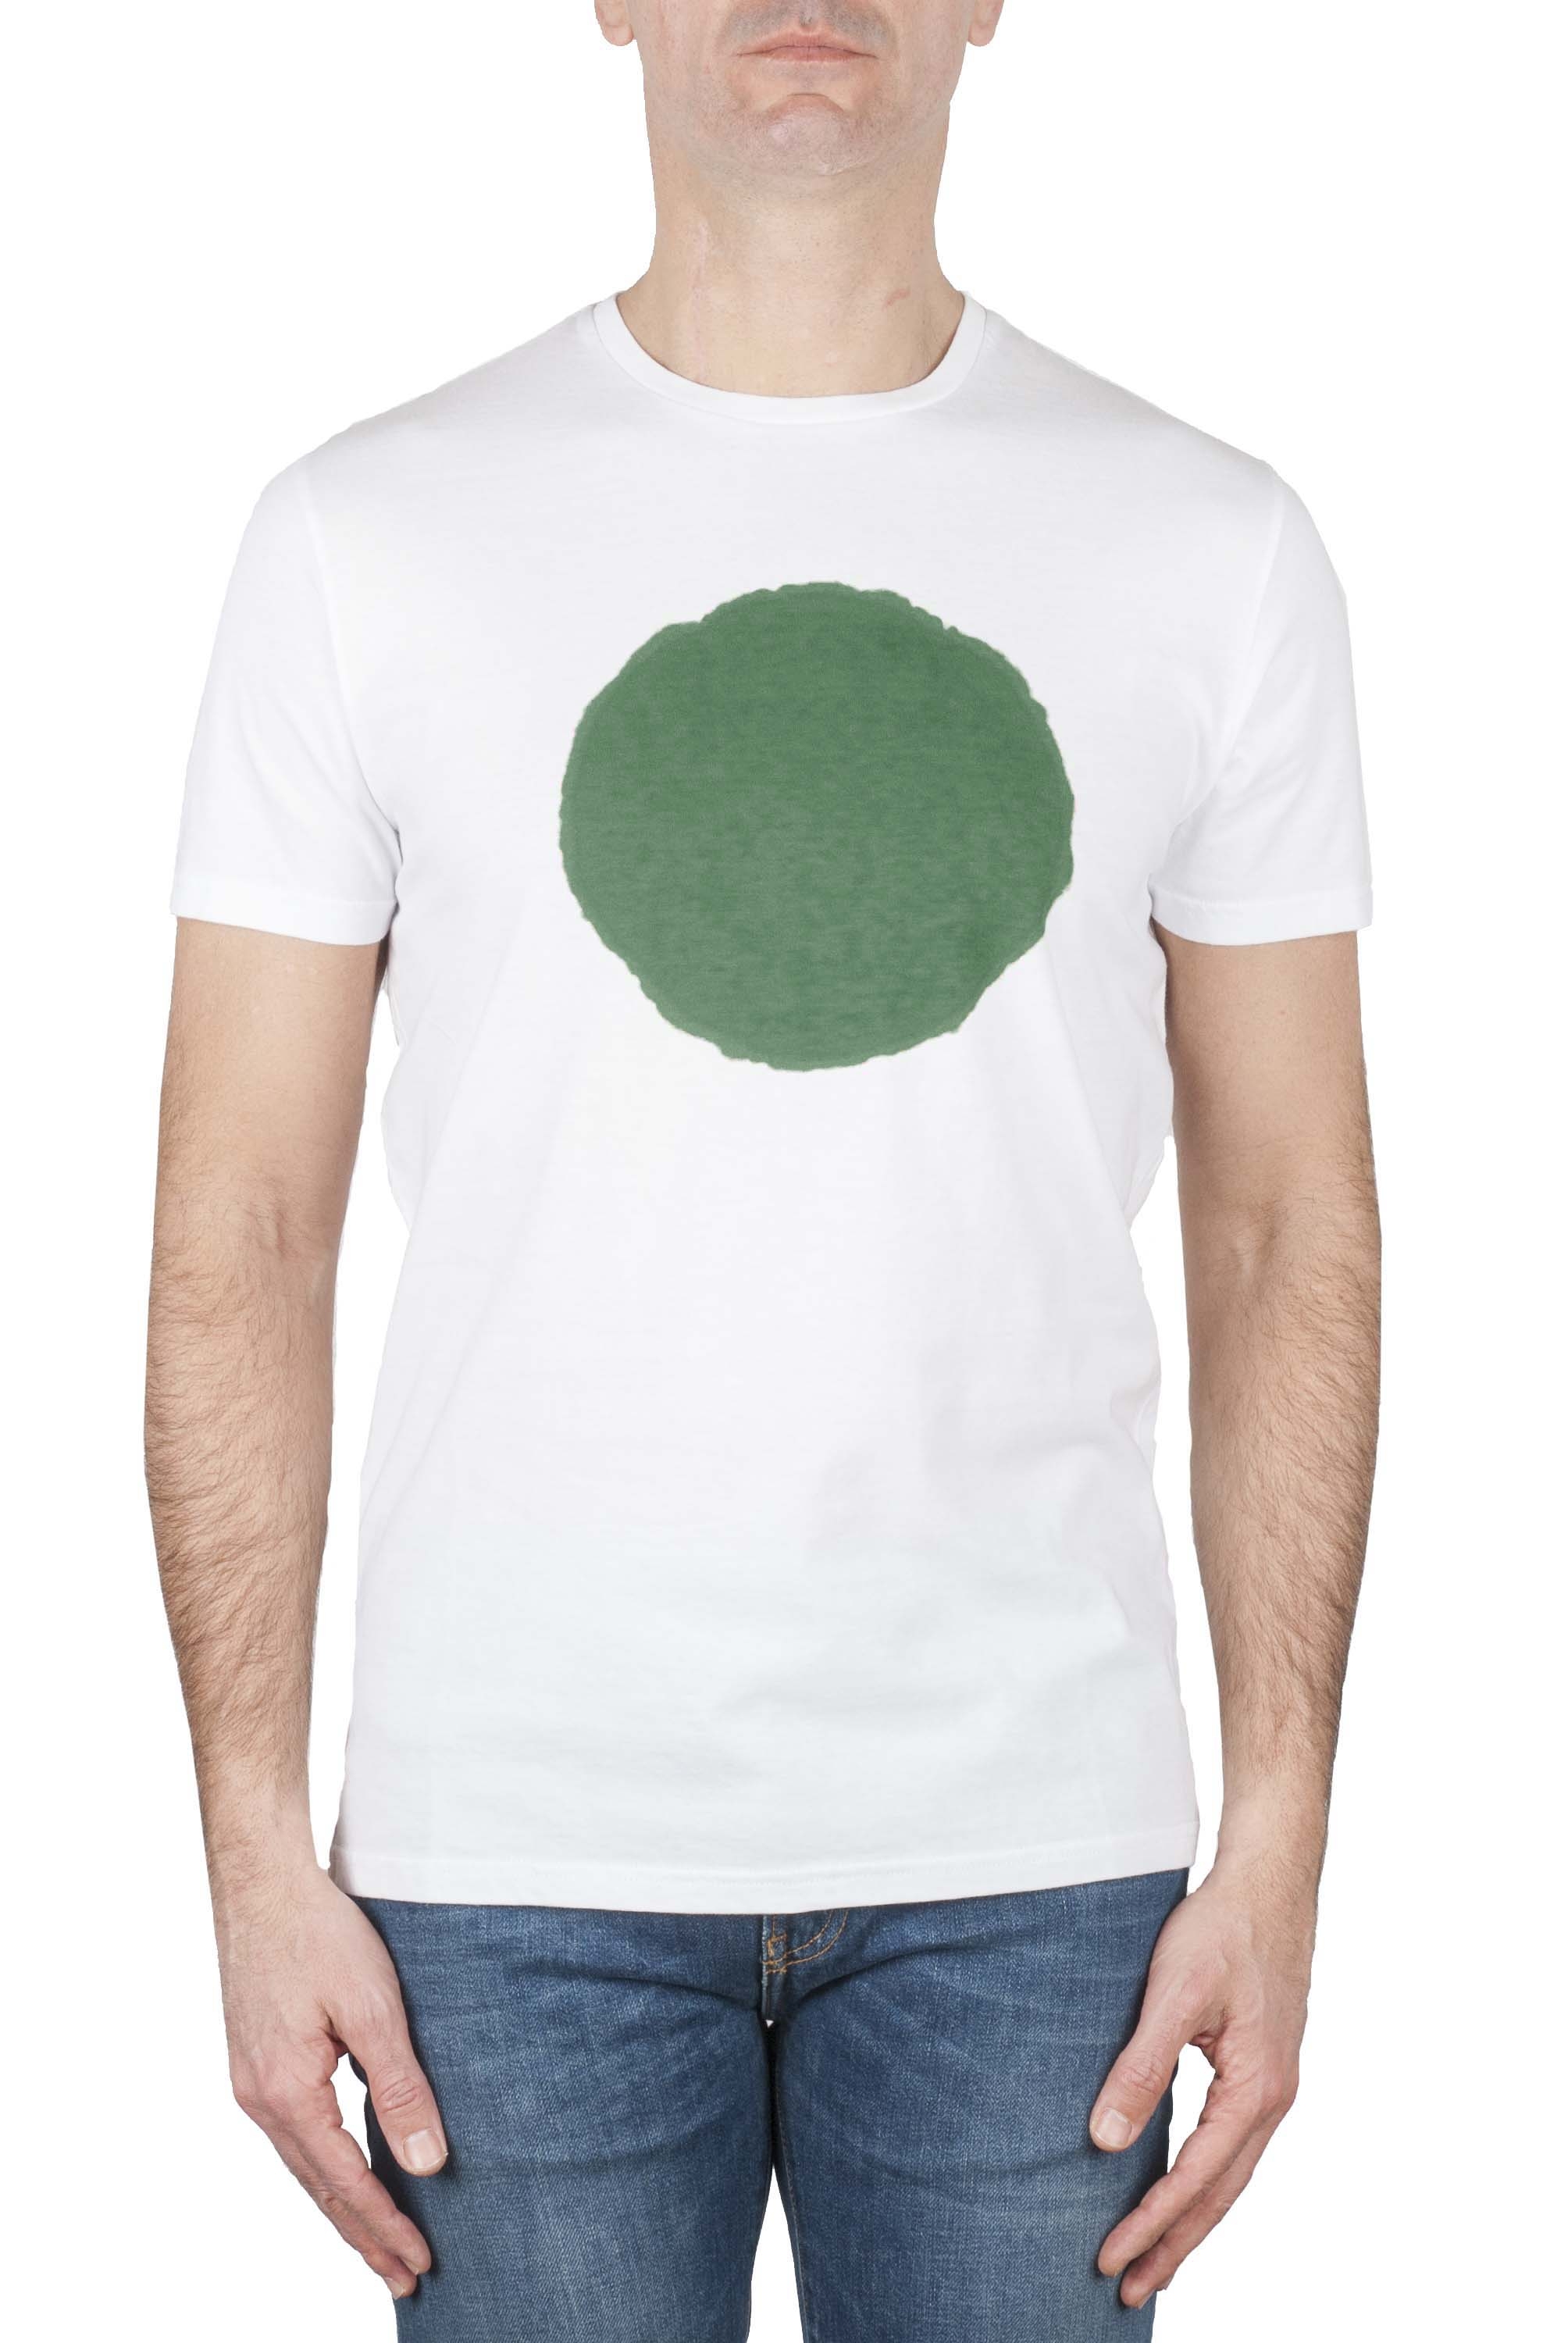 SBU 02847_2021SS Classic short sleeve cotton round neck t-shirt green and white printed graphic 01